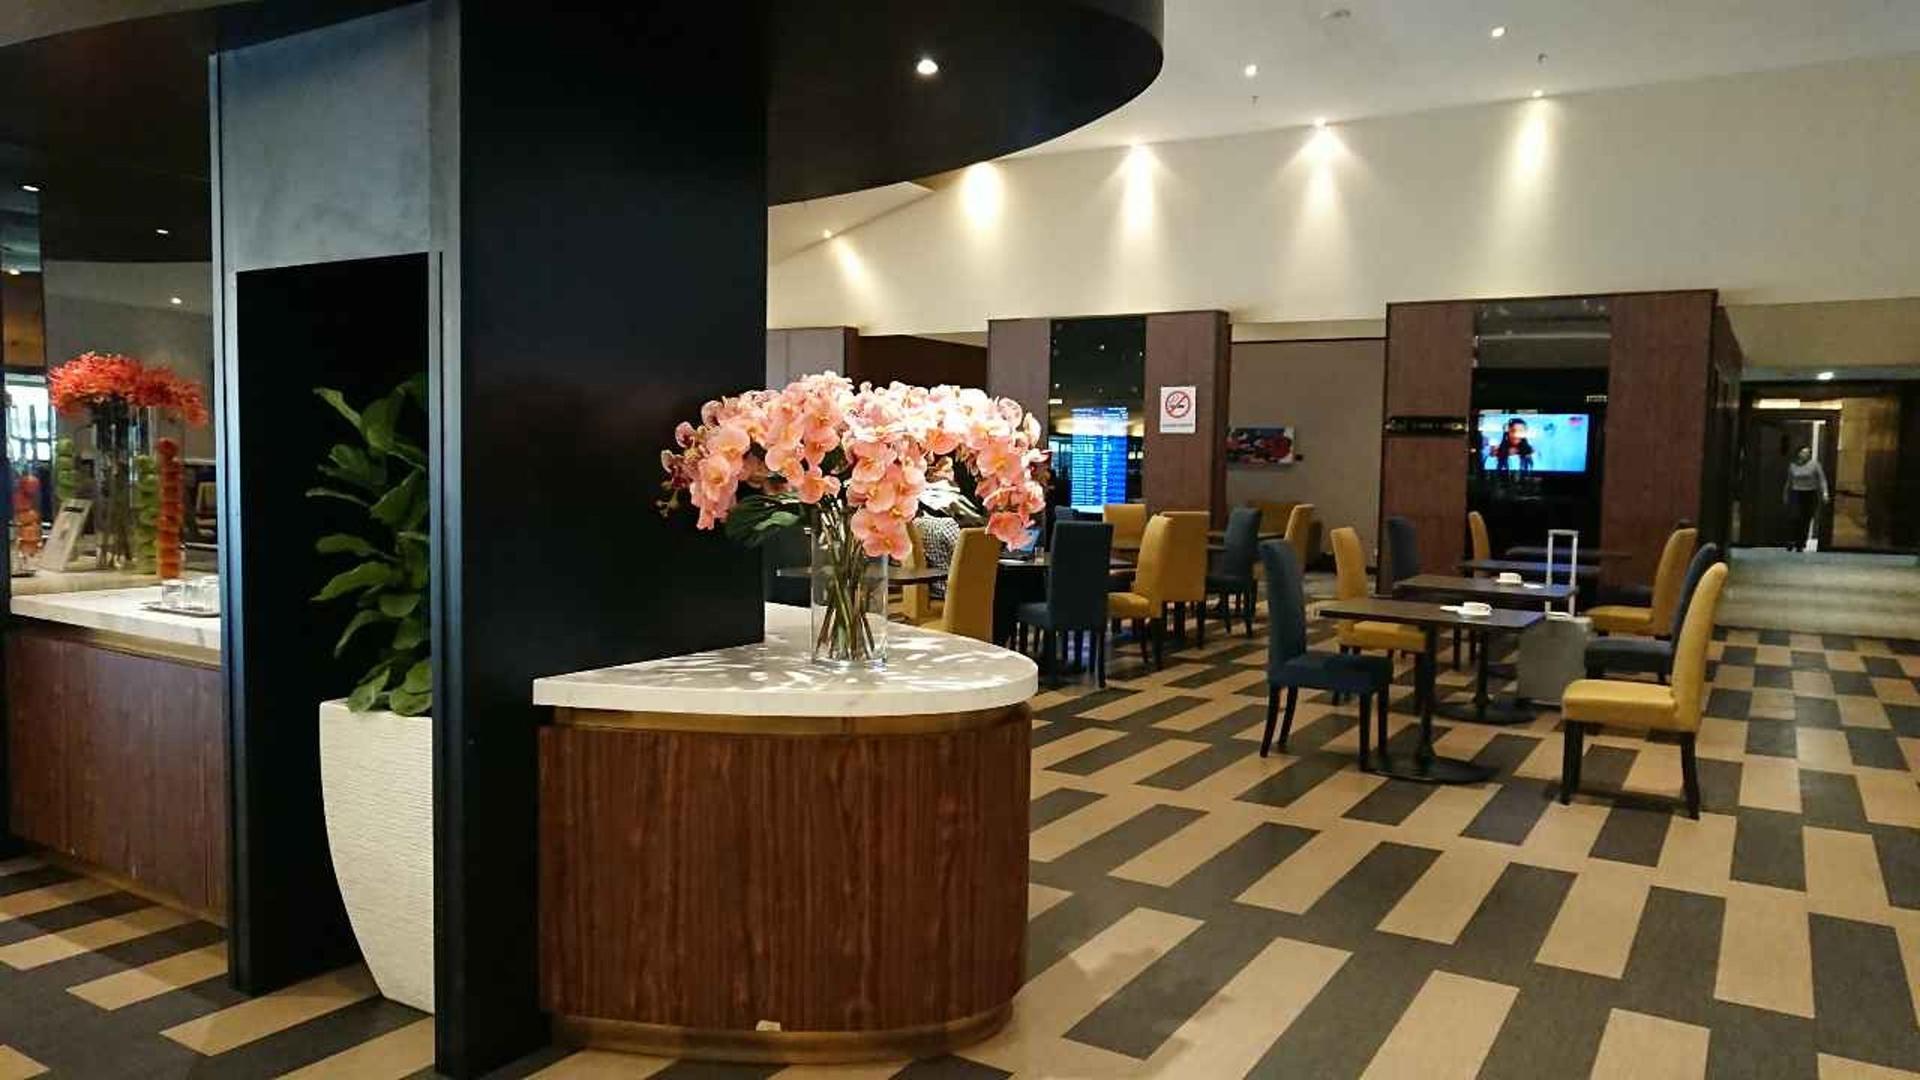 Malaysia Airlines Golden Business Class Lounge image 12 of 27